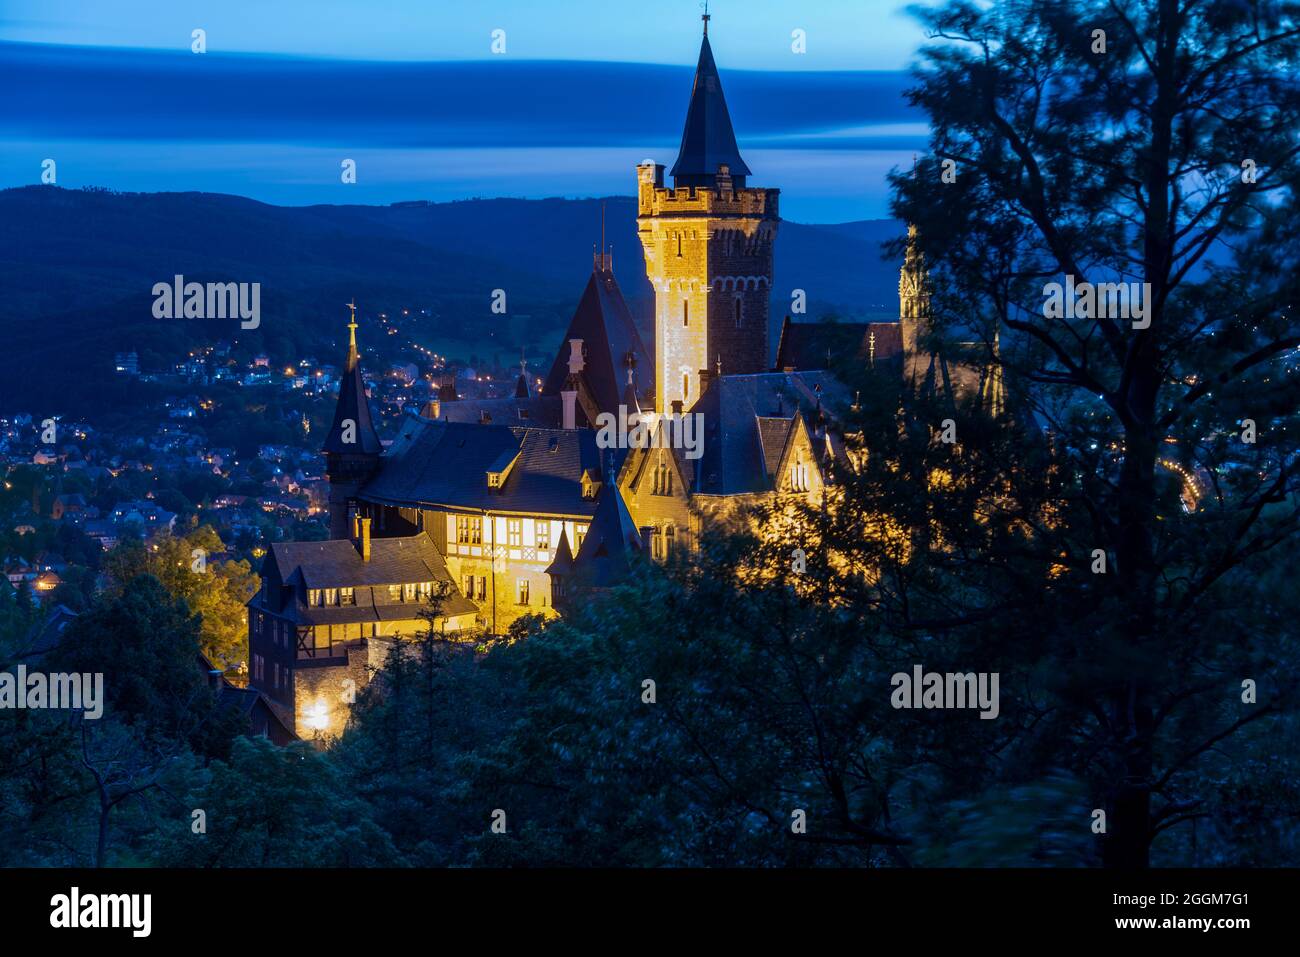 Germany, Saxony-Anhalt, Wernigerode, view of the Wernigerode Castle, Harz. Stock Photo